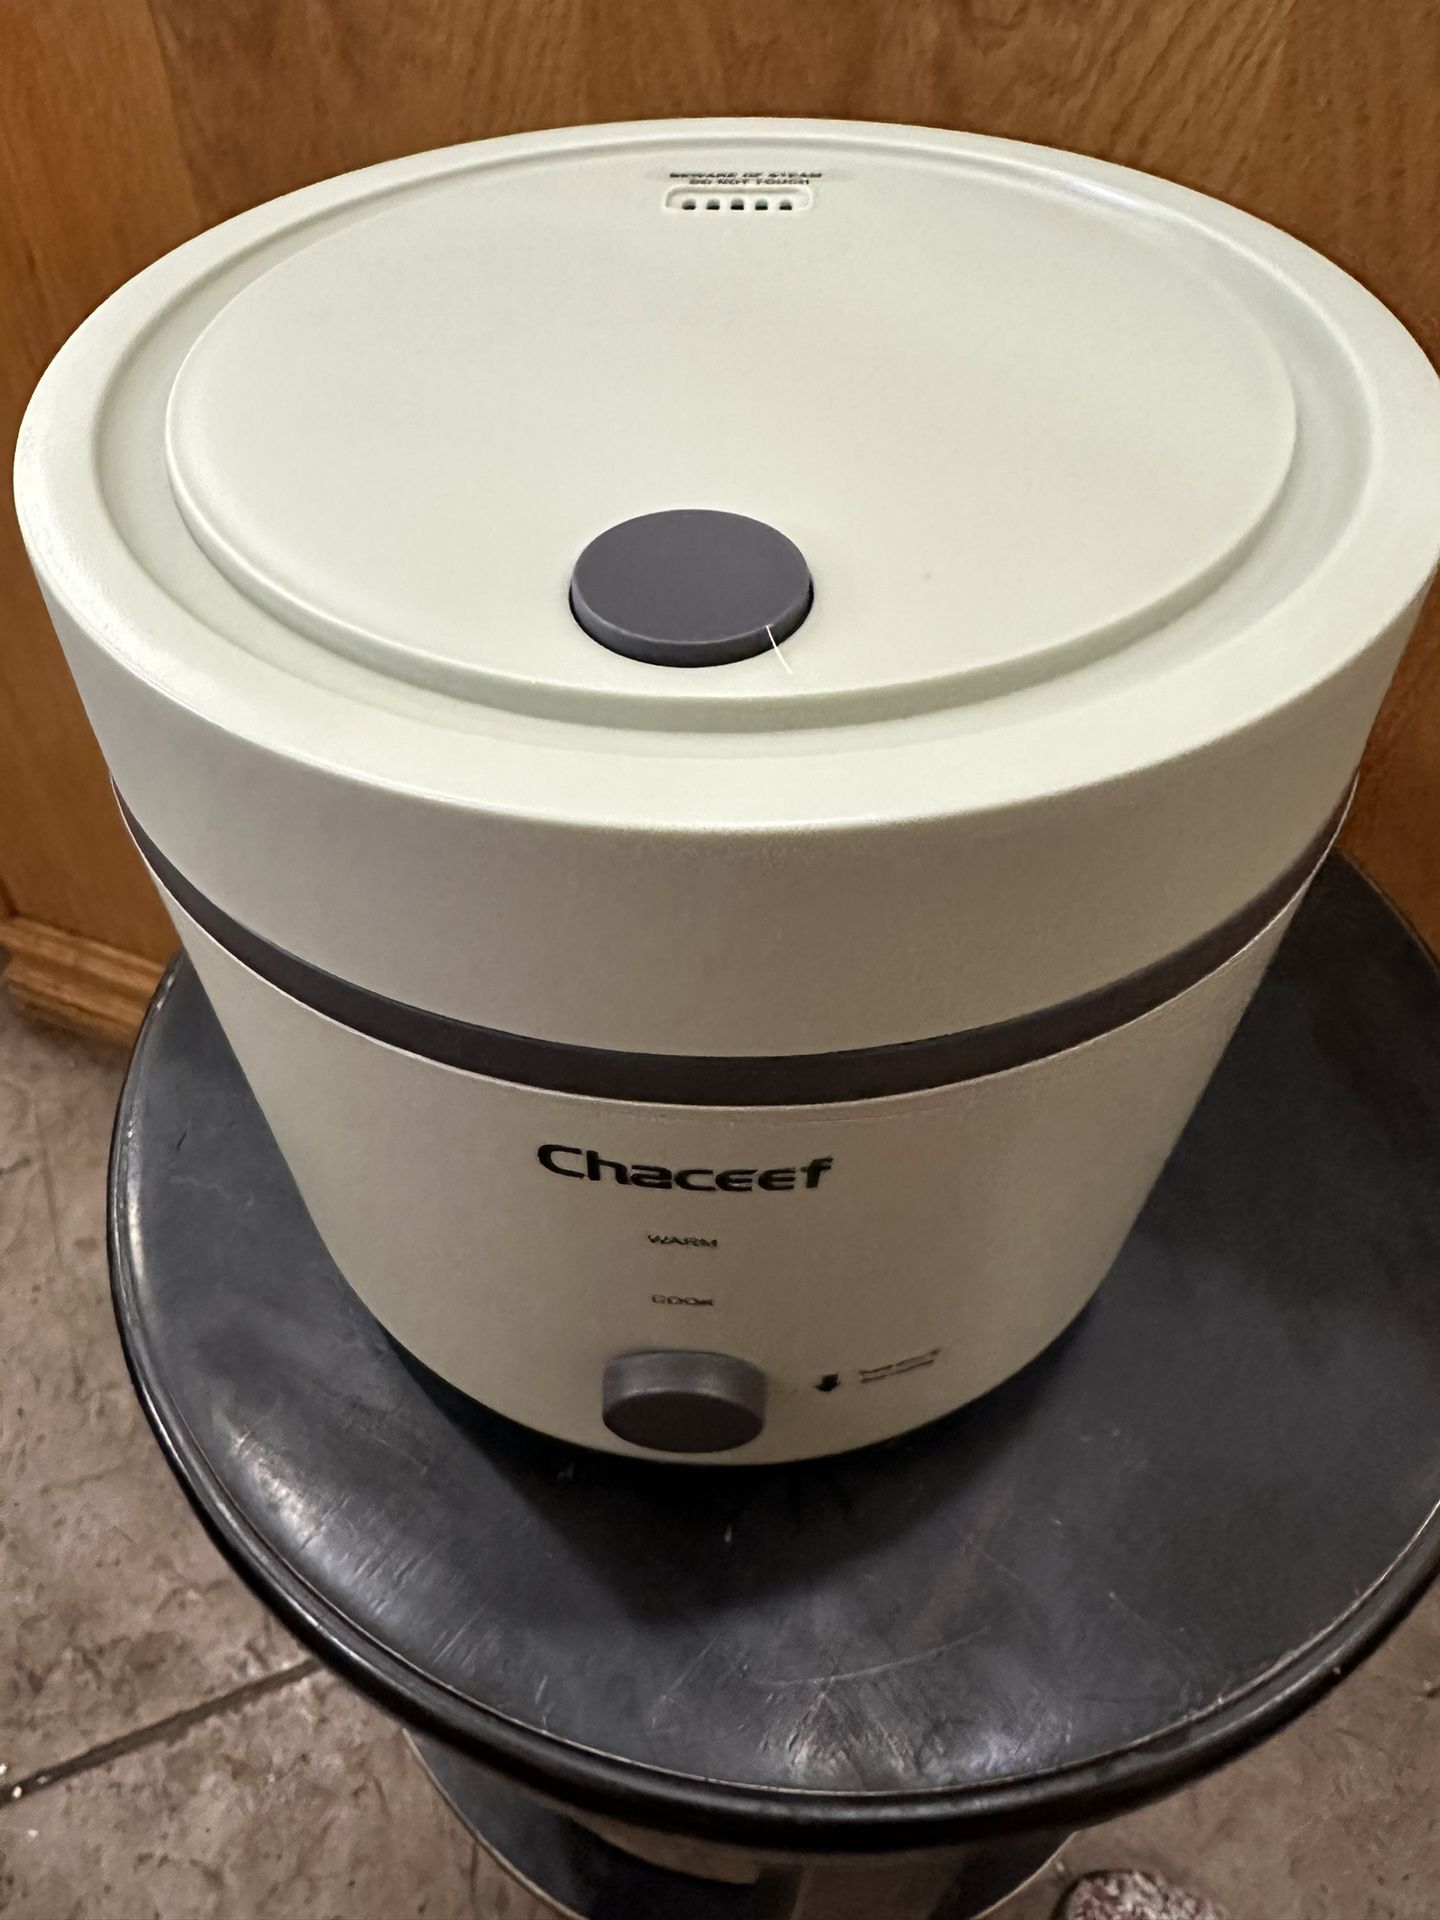 CHACEEF Rice Cooker 3-Cups Uncooked, 1.5L Small Rice Cooker with Non-stick  coating, BPA Free, Portable Mini Rice Cooker for Sale in Las Vegas, NV -  OfferUp